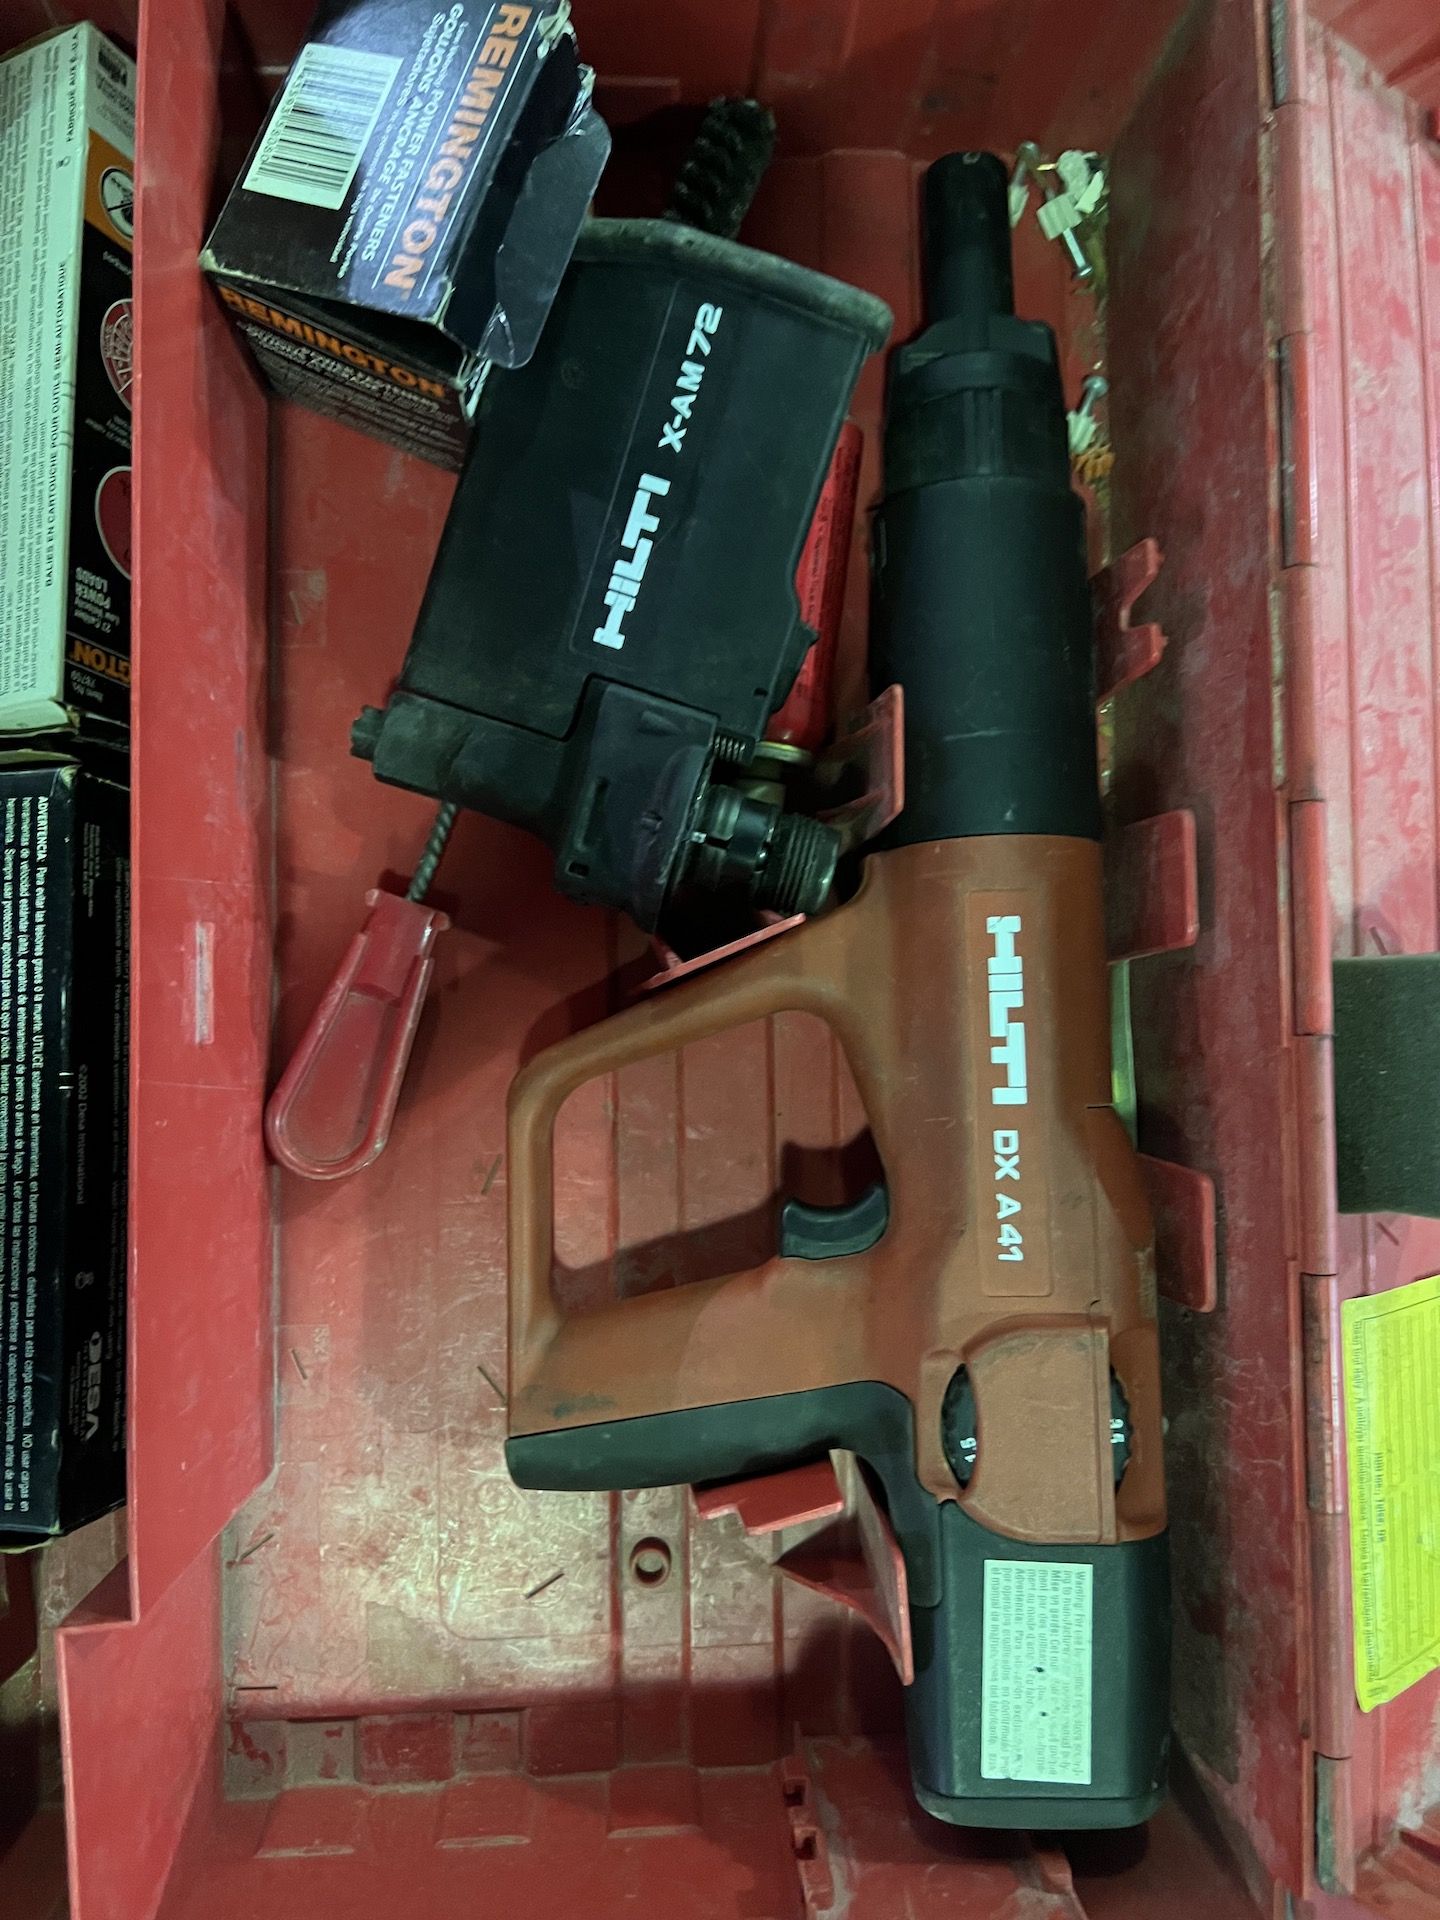 HILTI DX A41 POWDER ACTUATED NAIL GUN WITH X-1M72 MAGAZINE - Image 4 of 13